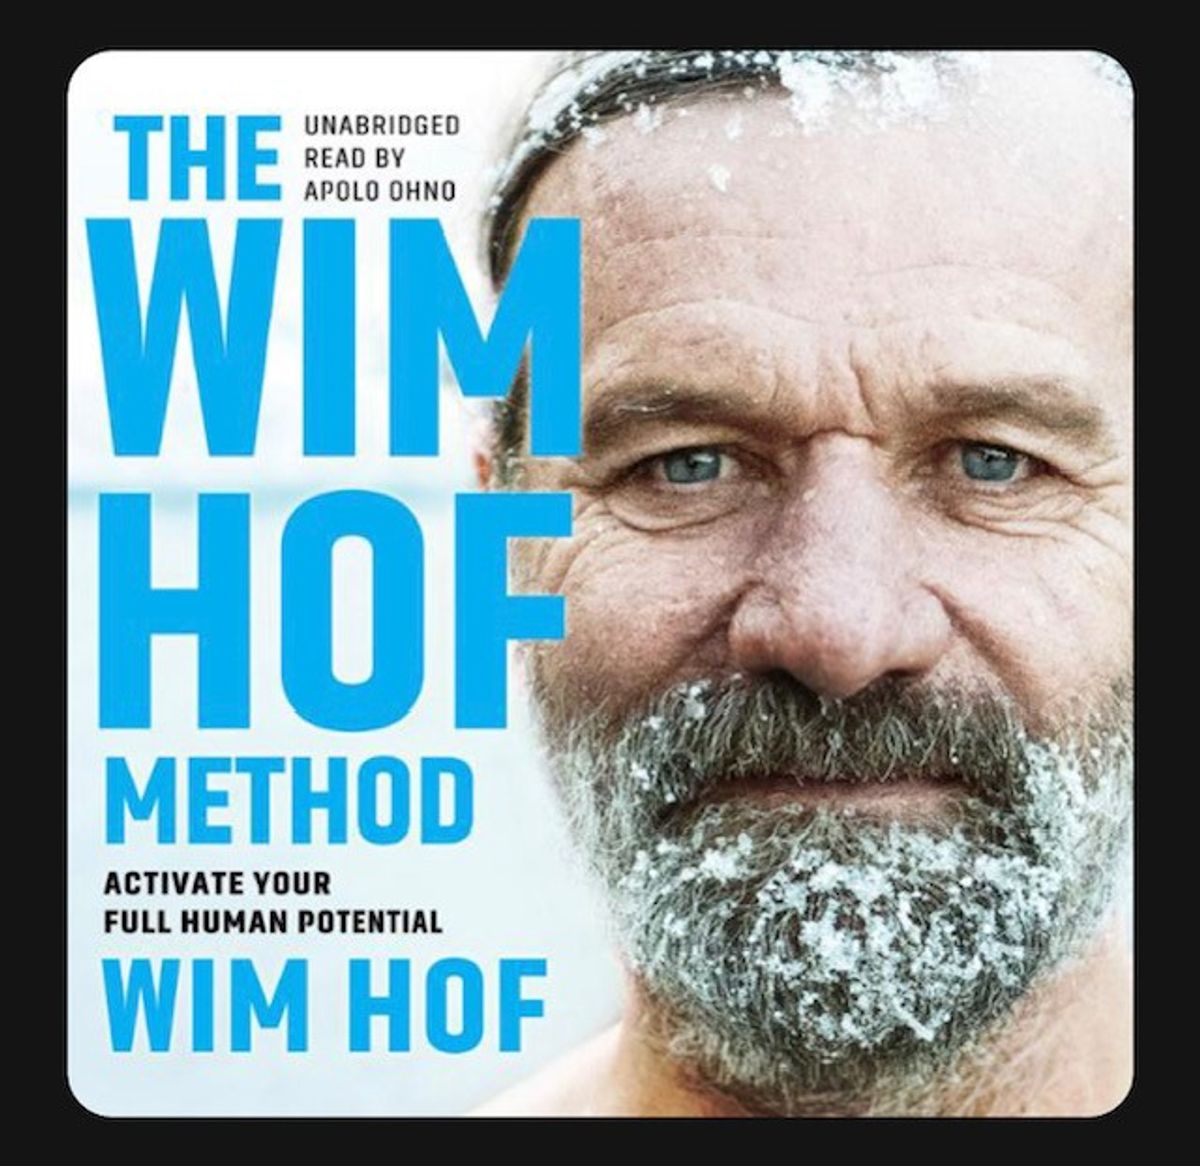 Meet the man behind the ice bath trend. Book #7 of 52 for the year complete. It was a little bit long, but very interesting. #WimHofMethod #MindPower #MindBodyConnection  #MindfulBreathing #Breathwork #Meditation #Mindfulness #LifestyleChange #EnergyWork